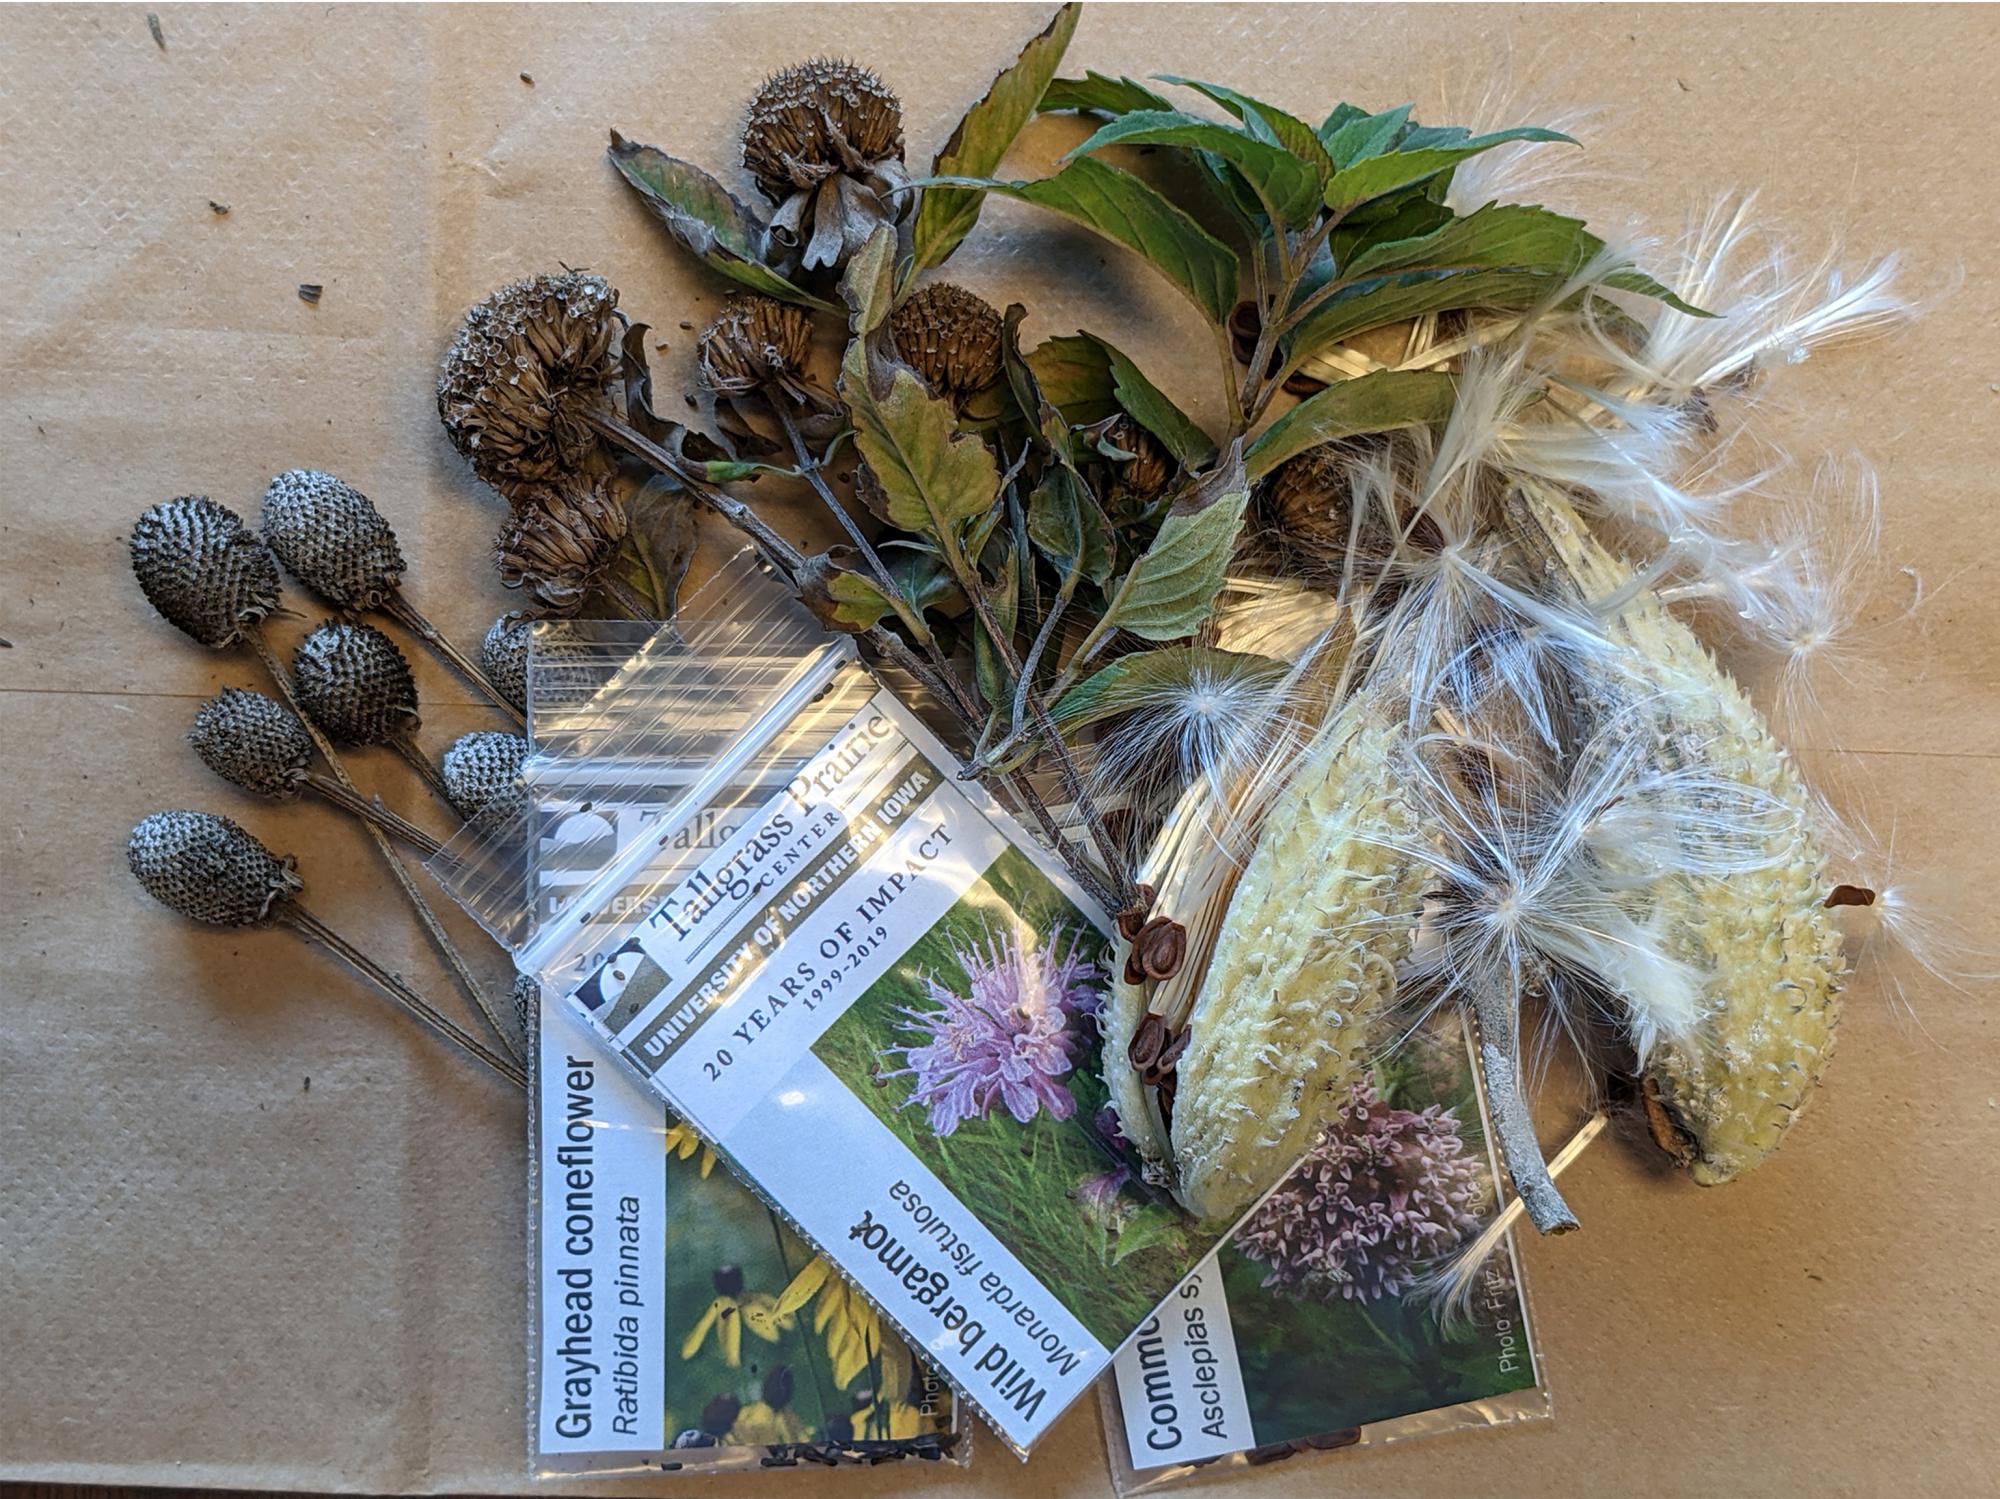 Seed packets used for outreach